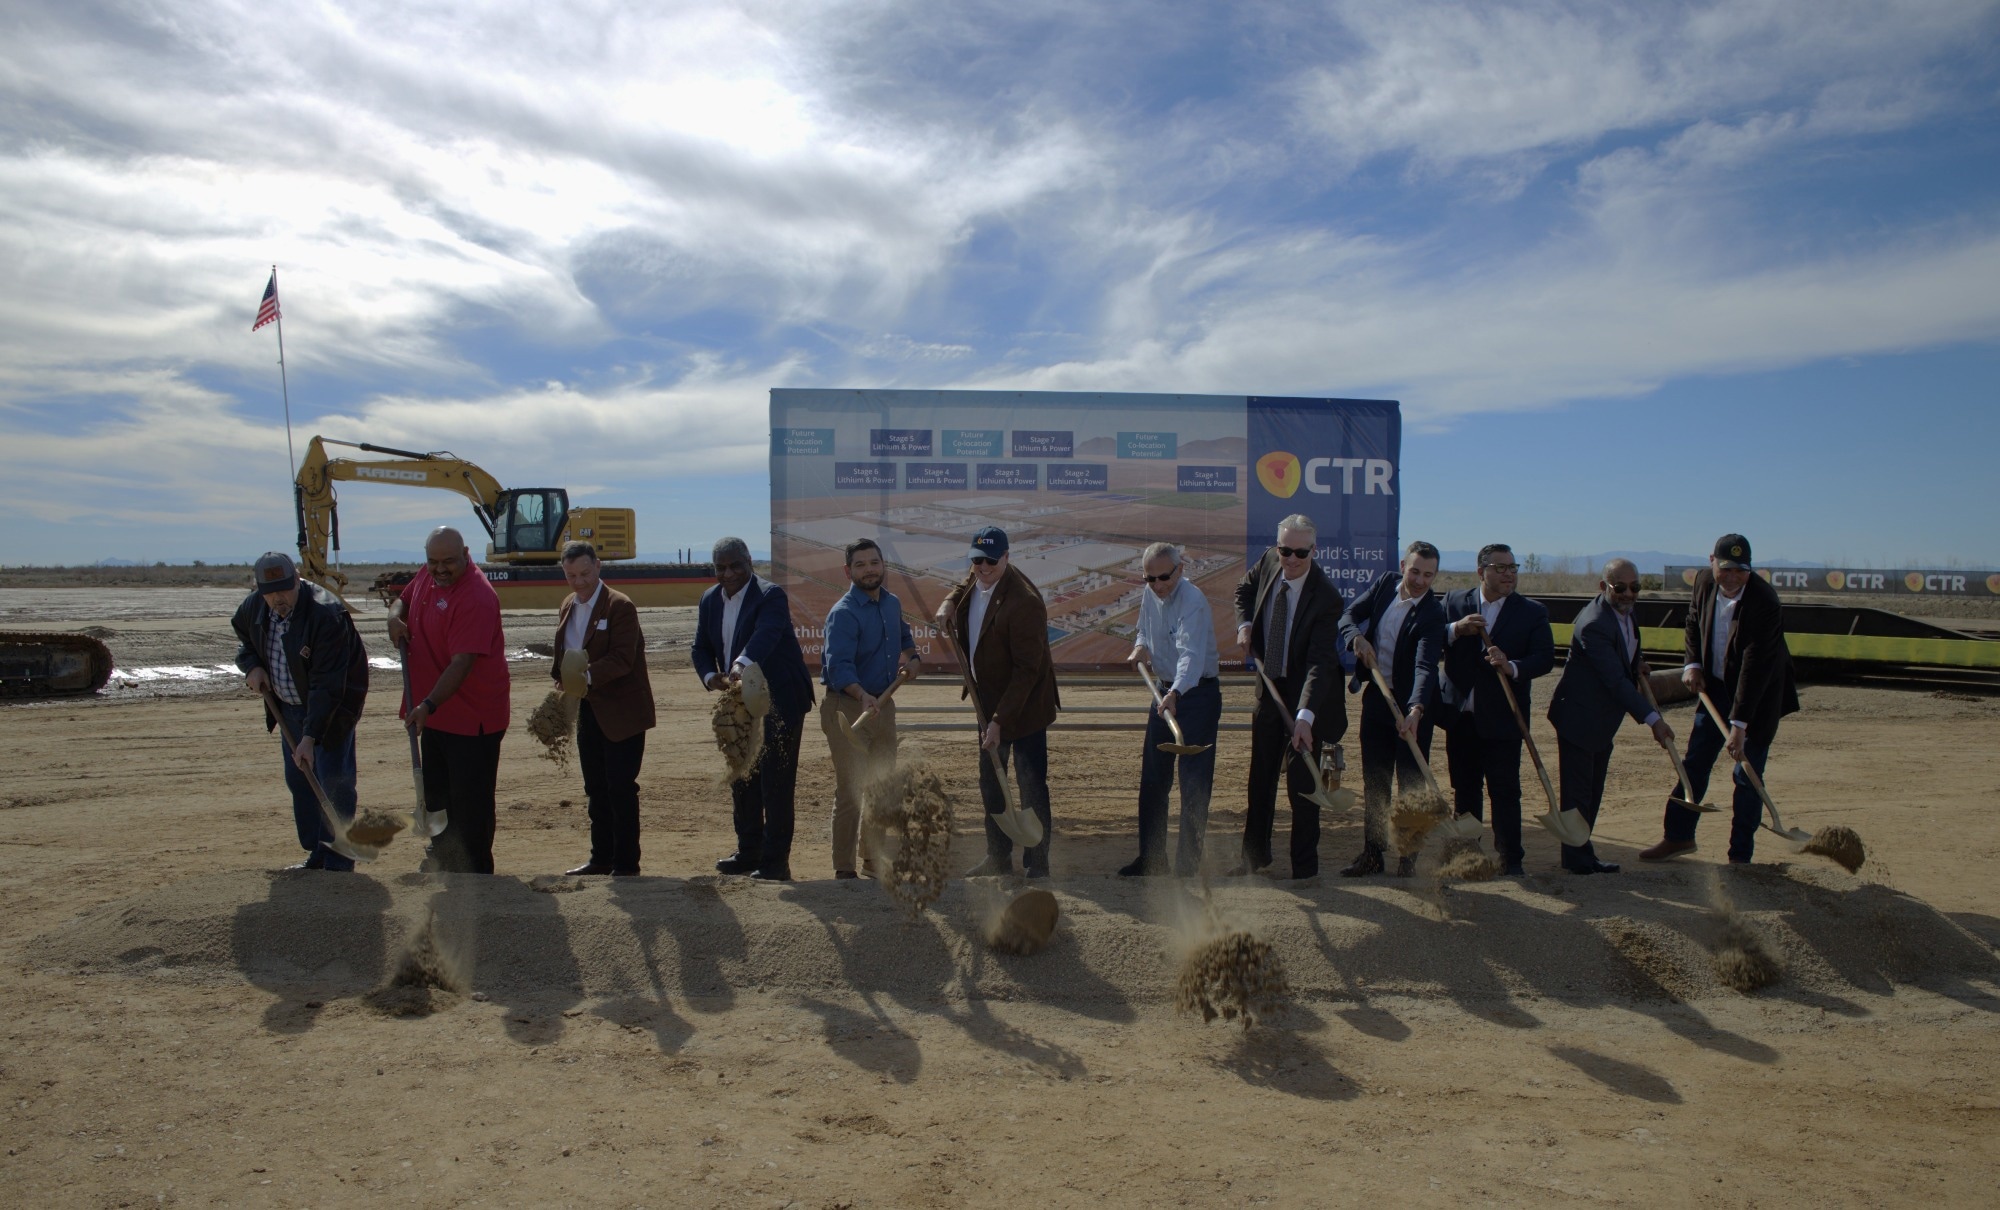 CTR Breaks Ground on the Lithium Valley Campus With Its First $1.85 Billion Clean Lithium and Power Development.